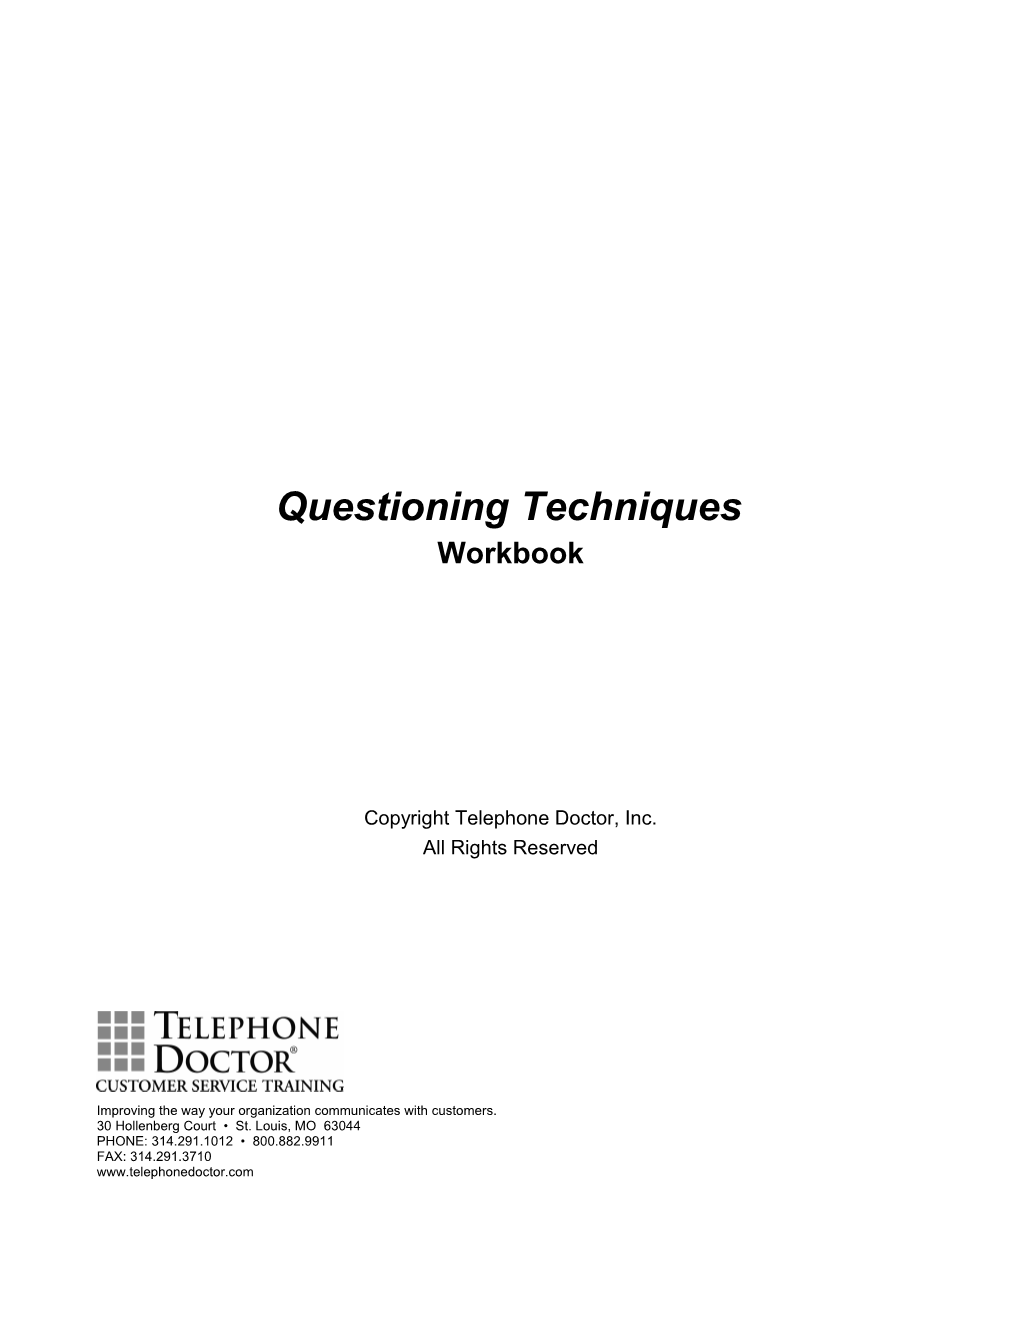 Questioning Techniques Workbook